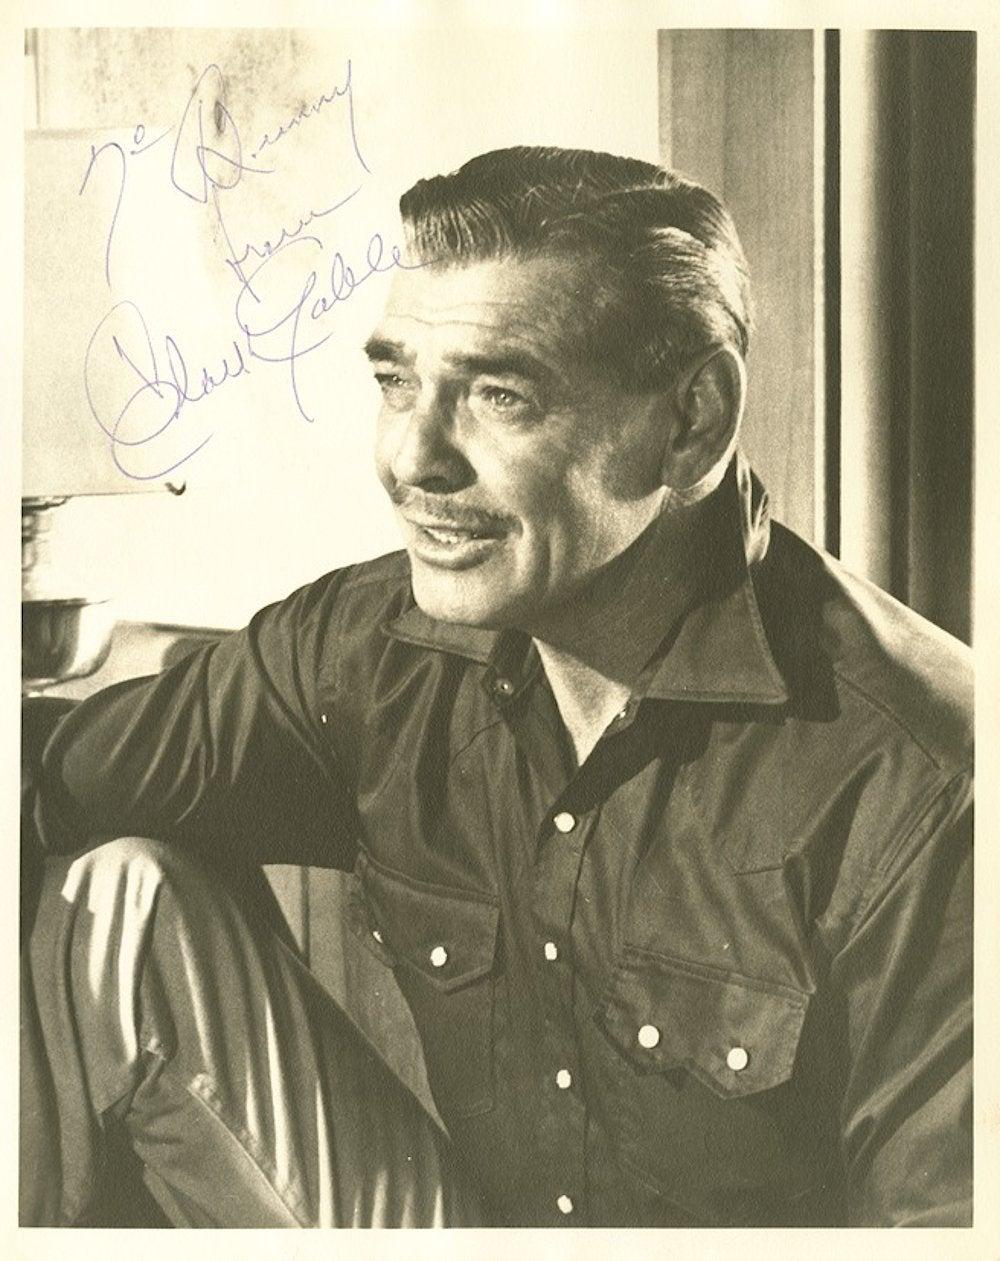 20th Century Clark Gable Signed Photograph Black and White circa 1930s / 1940s